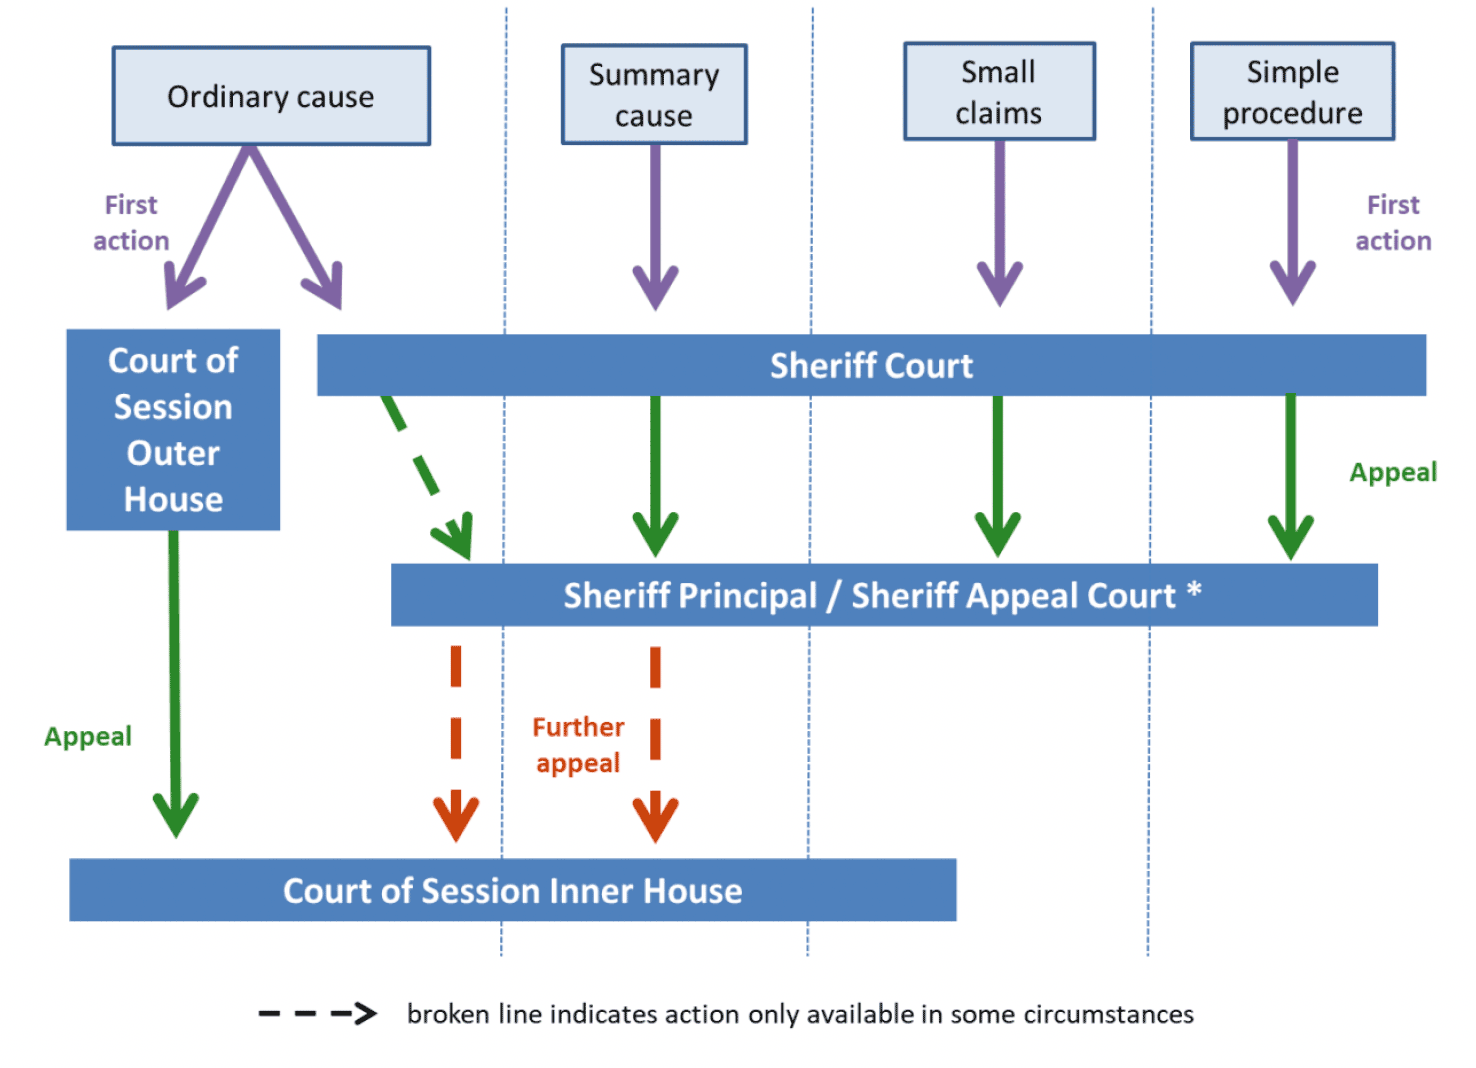 Chart showing the way in which cases progress through the civil courts. Generally cases are handled at the Sheriff Court, with appeals going to the Sheriff Appeal Court. Appeals not resolved by the Sheriff Appeal Court will go to the Court of Session Inner House.